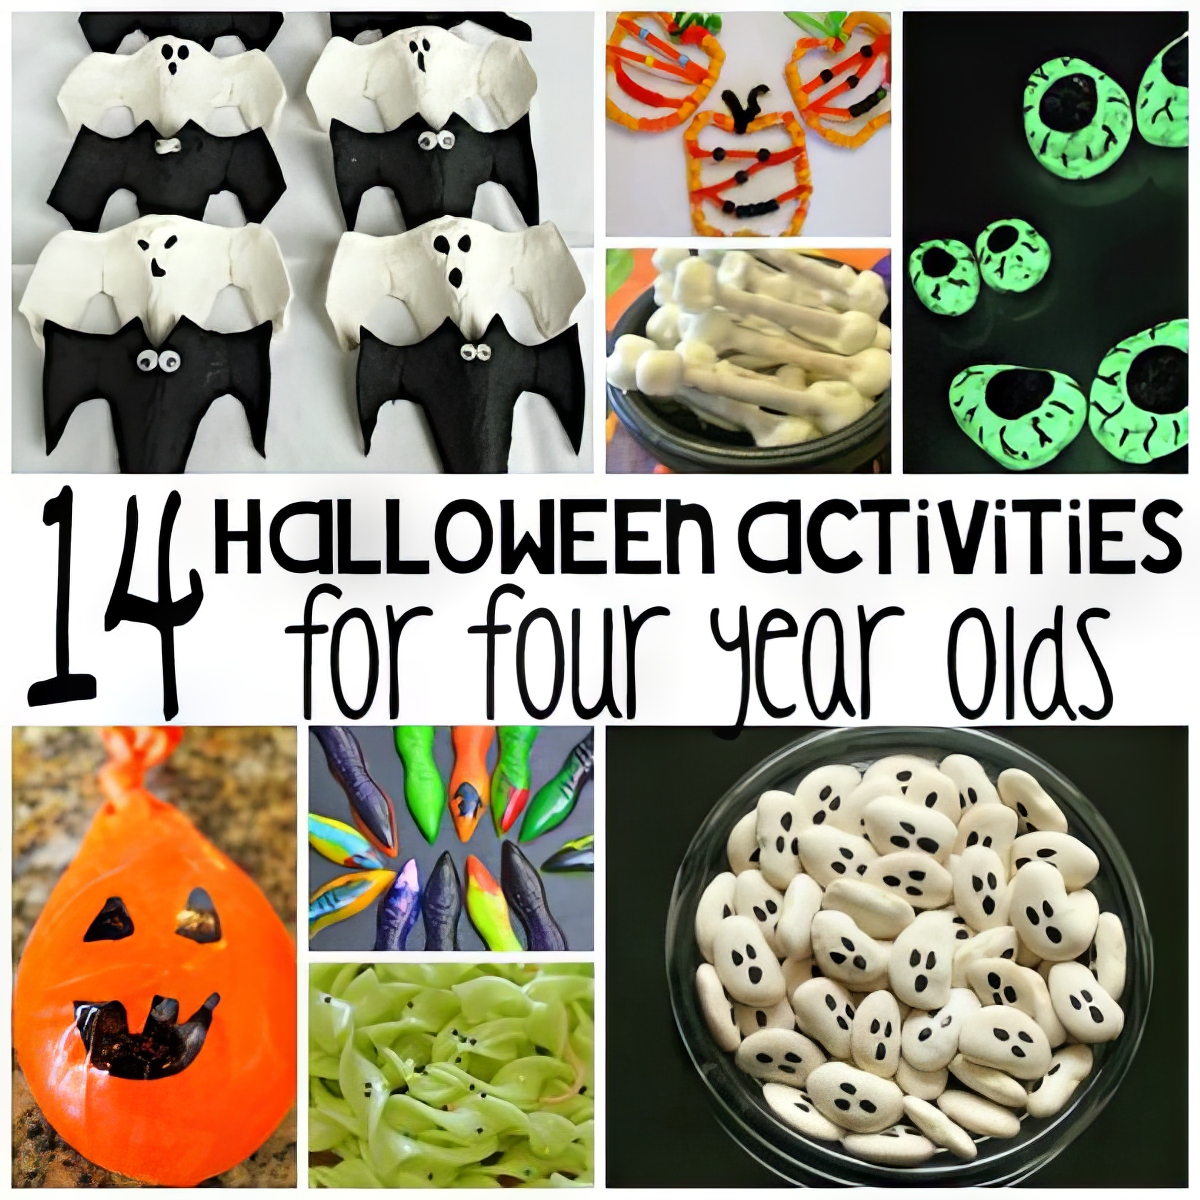 14 halloween activities for four year olds by play ideas